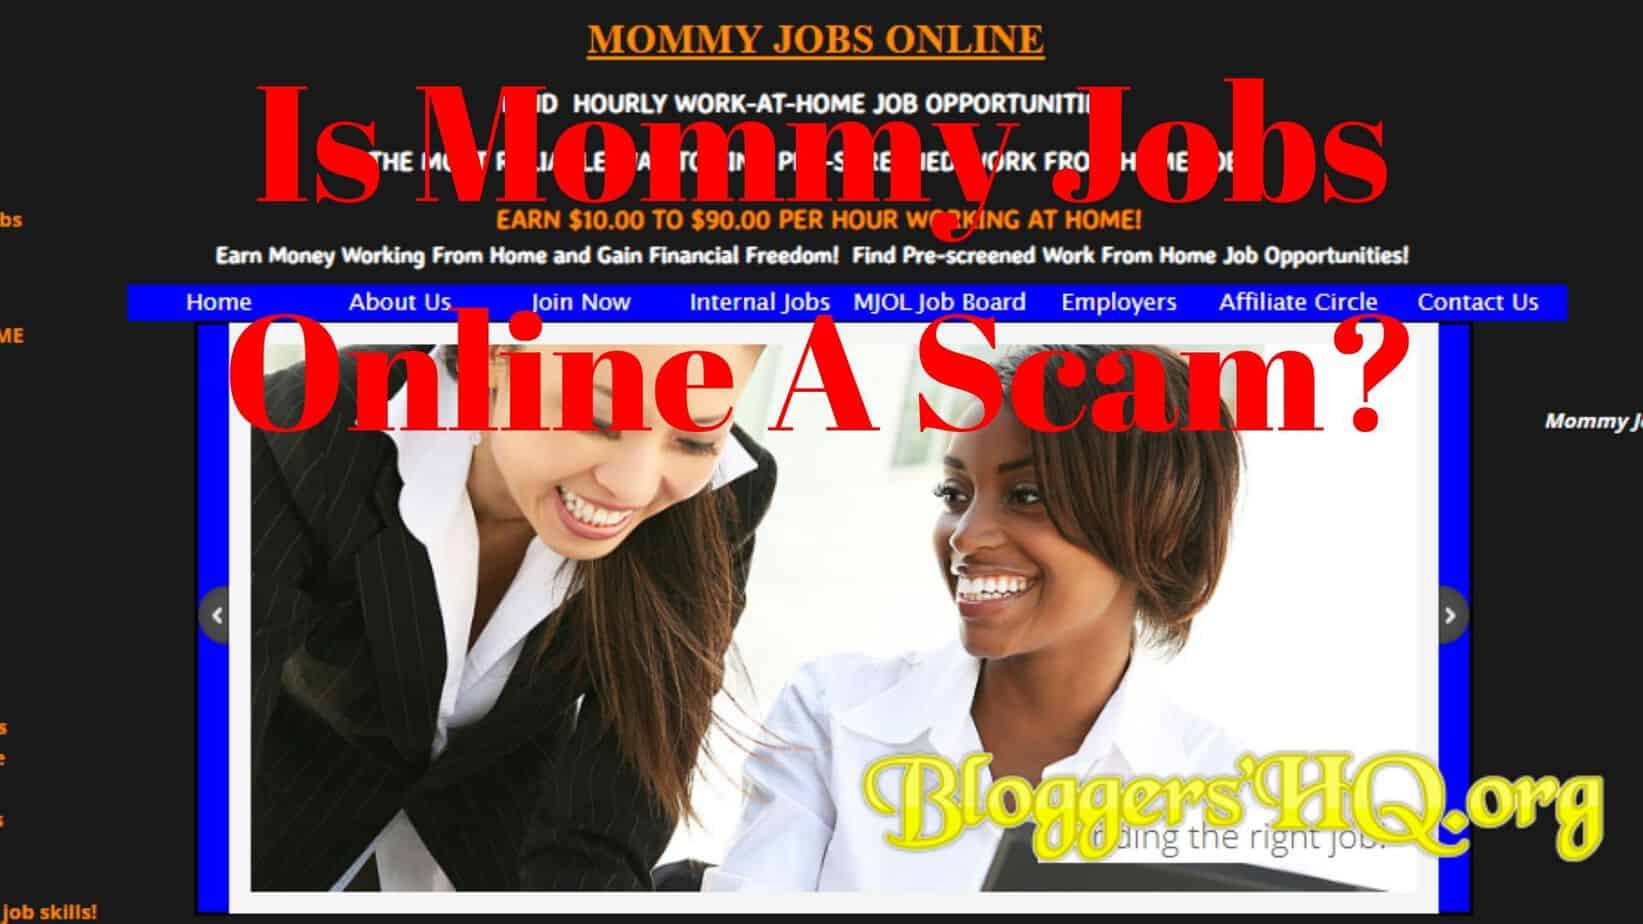 Is Mommy Jobs Online A Scam